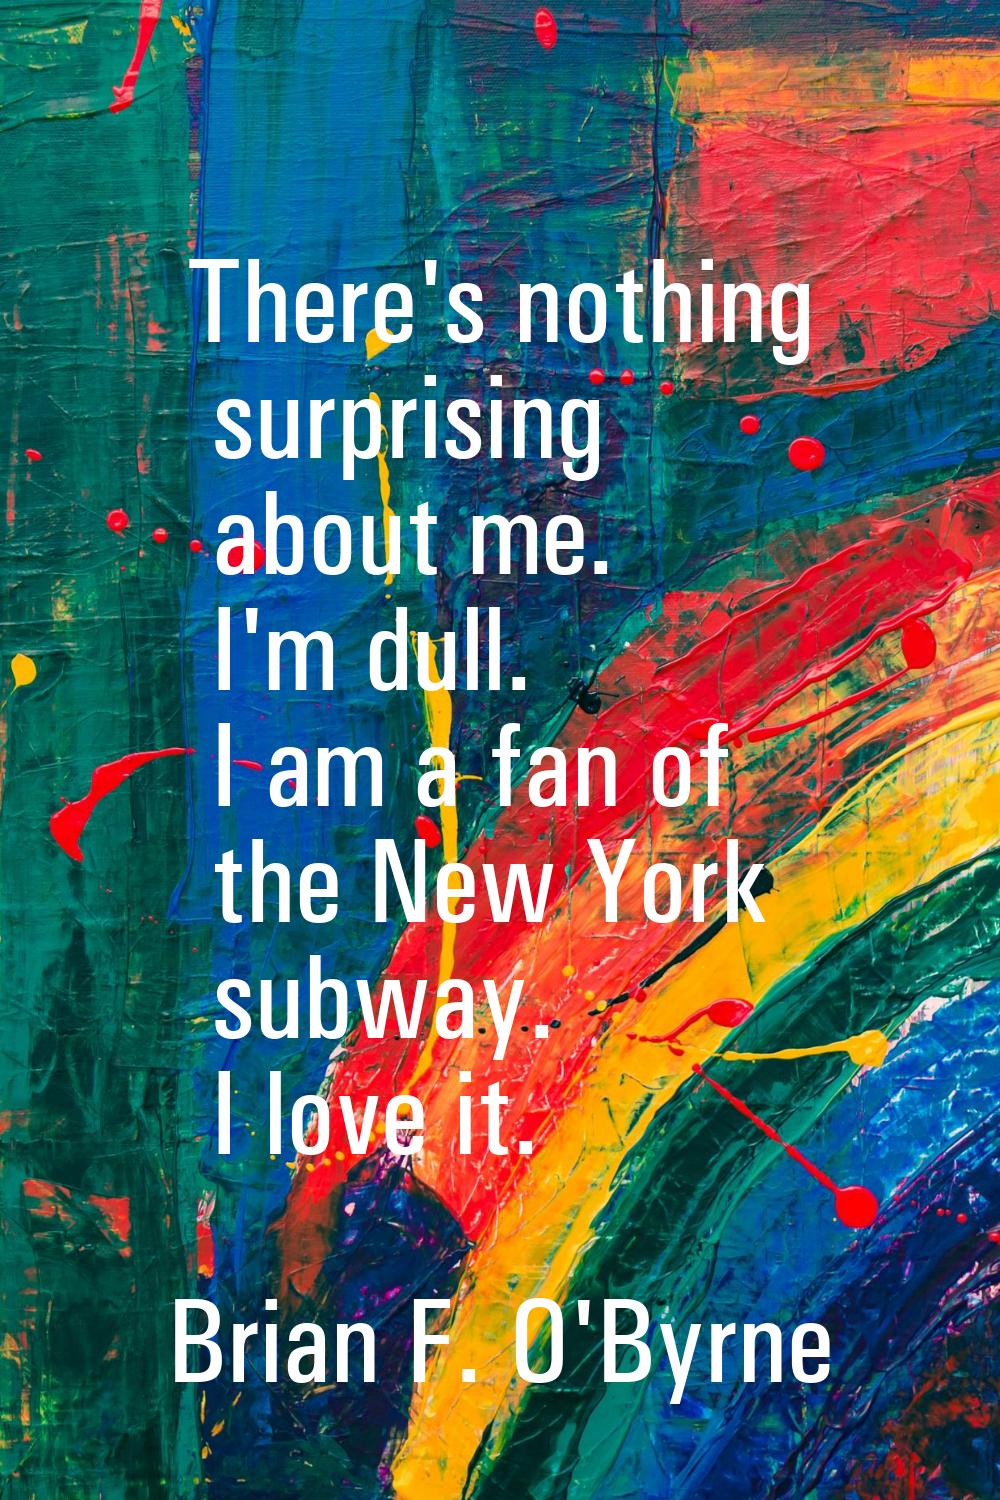 There's nothing surprising about me. I'm dull. I am a fan of the New York subway. I love it.